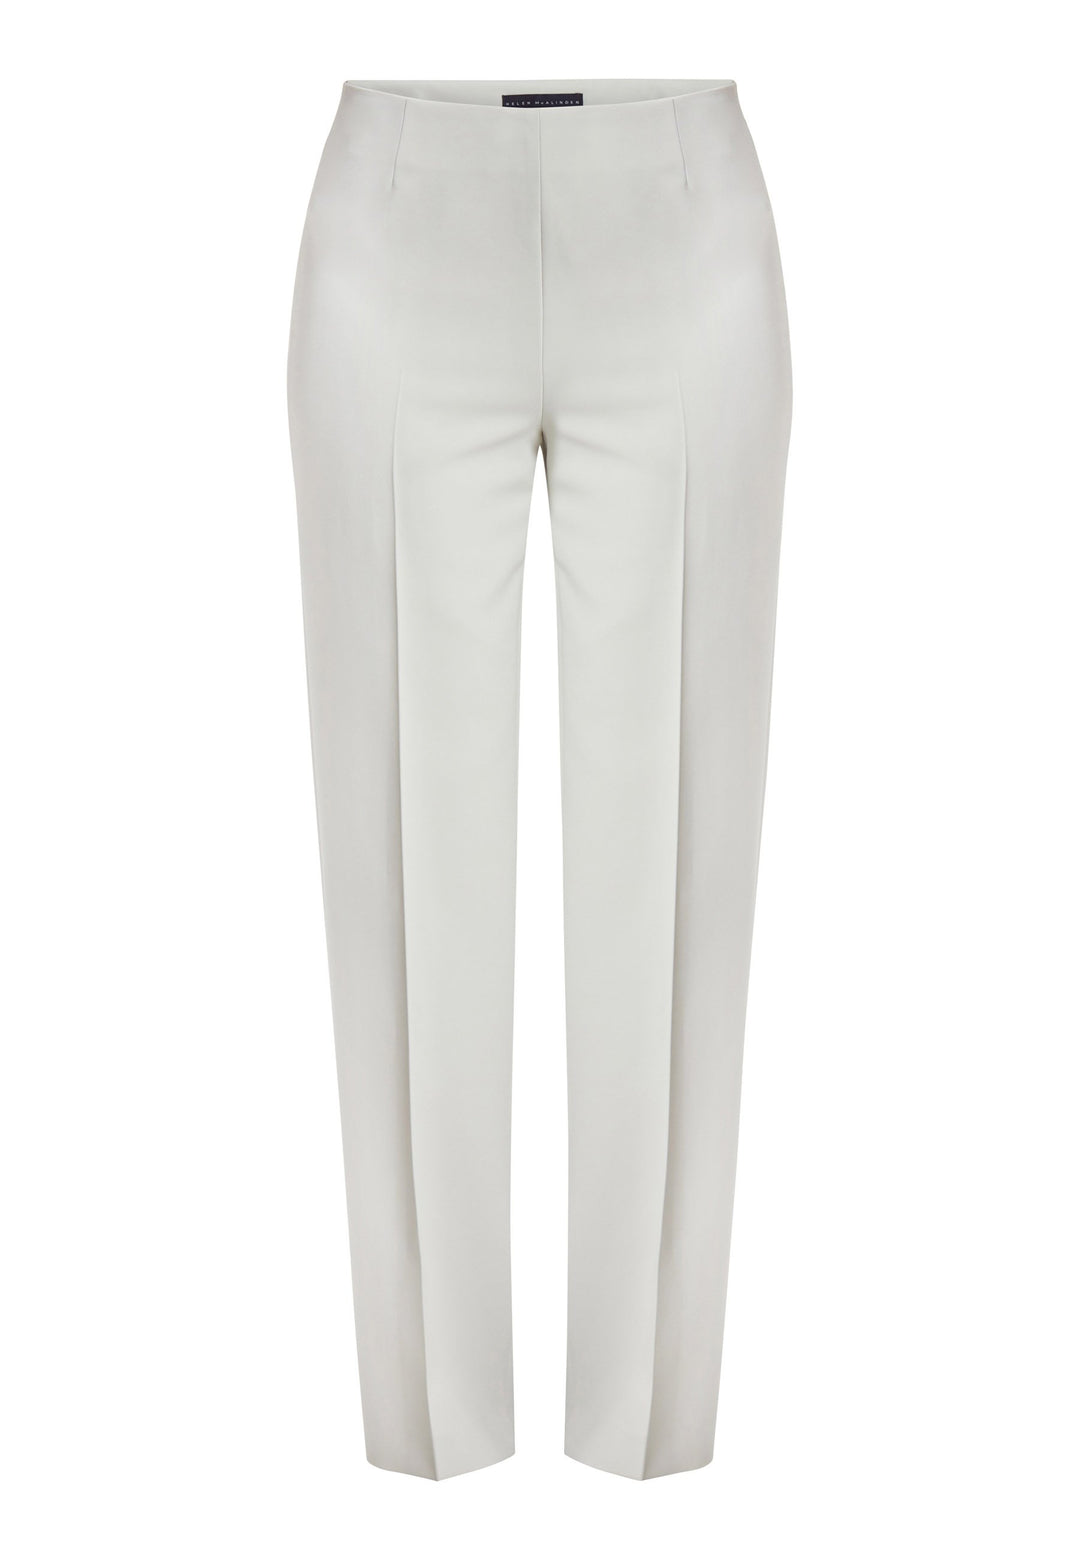 Investment-worthy, easy-fitting flat front pant. Relaxed straight leg crafted in a fluid tricotine. A wardrobe staple and HMcA classic. This fabric is made with a hint of elastane to ensure comfort and ease of movement. Shown here in a sophisticated neutral. Pair with a simple tee for workwear appeal or elevate your look with the coordinating blazer.